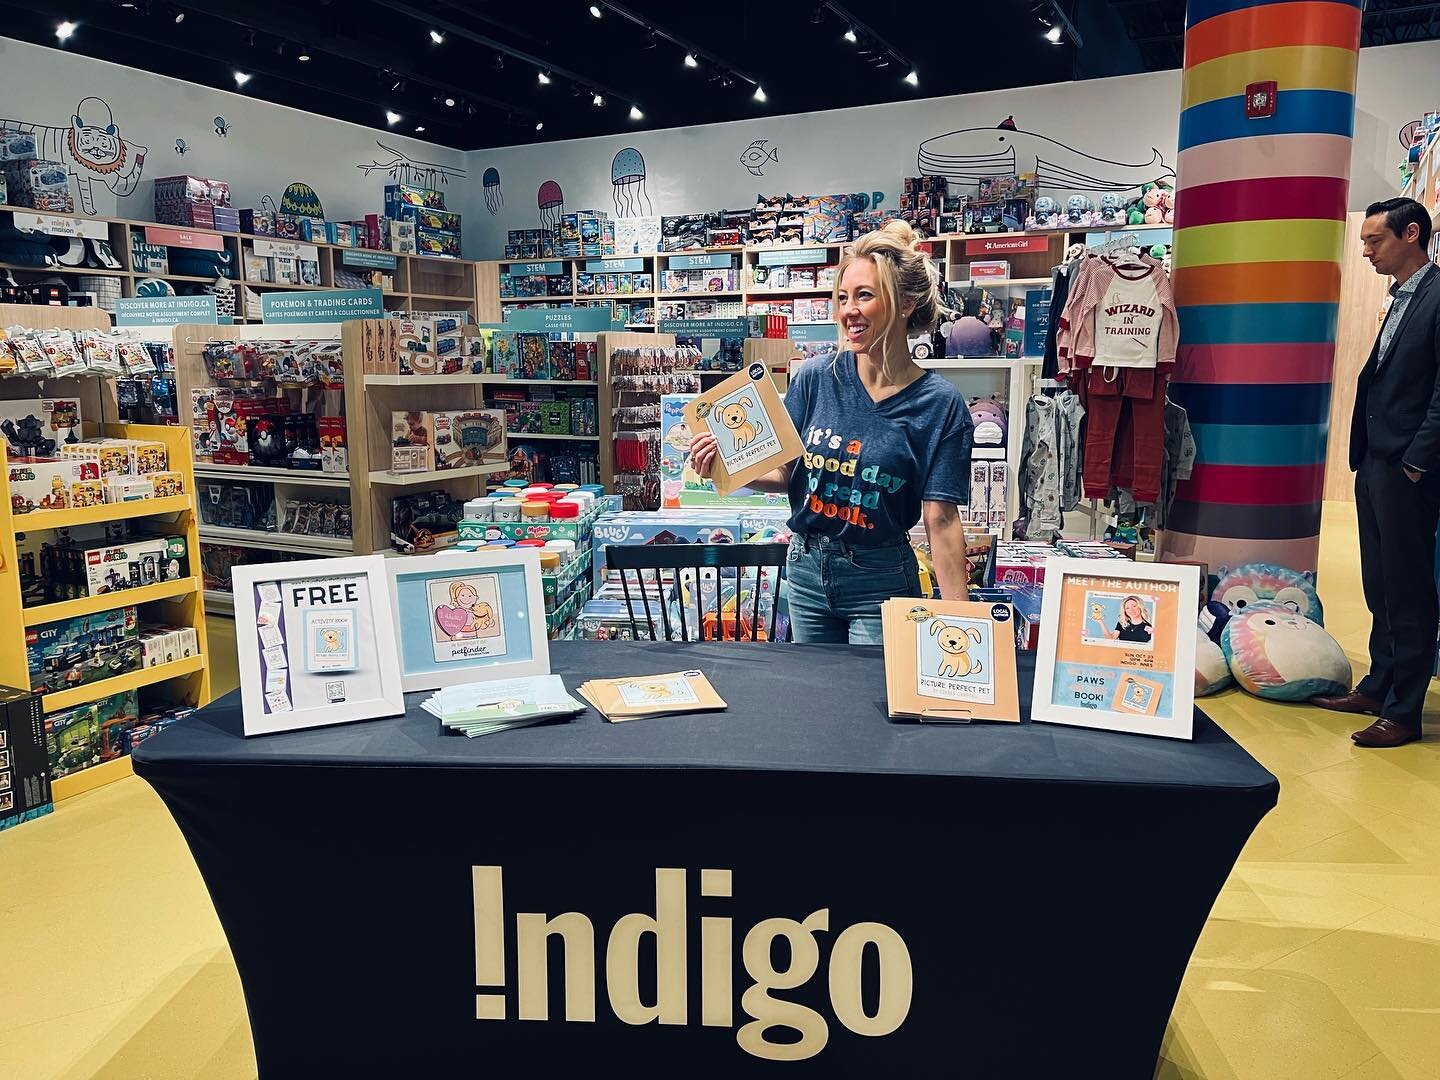 It&rsquo;s a good day to read a book 😉
Here until 4pm 📖✍️
Indigo - Innes 📍
Thanks everyone who stopped by so far to say hi and support 🤩 So nice seeing your faces ❤️